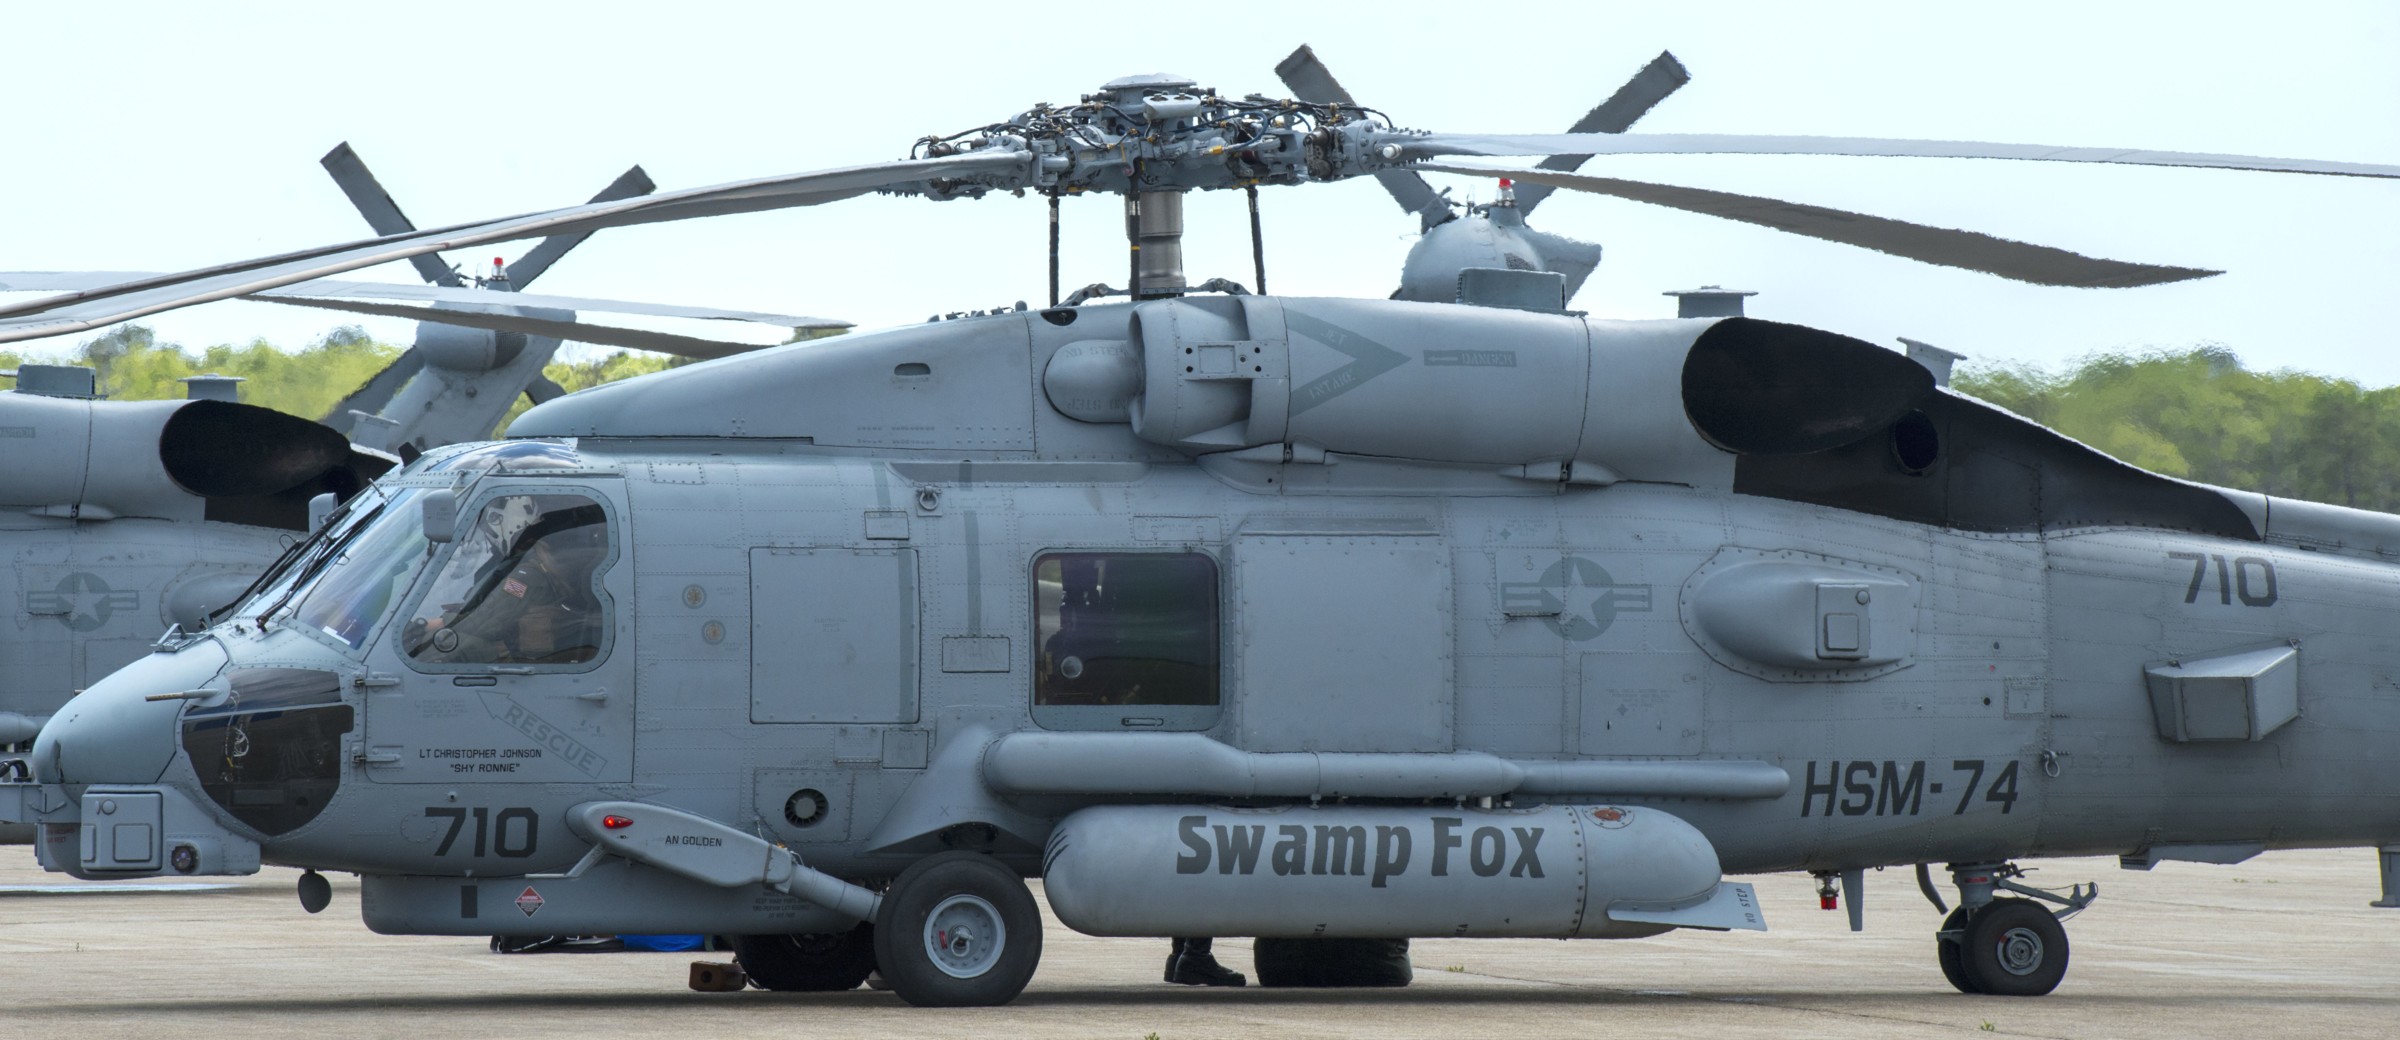 hsm-74 swamp foxes helicopter maritime strike squadron us navy mh-60r seahawk 2013 34